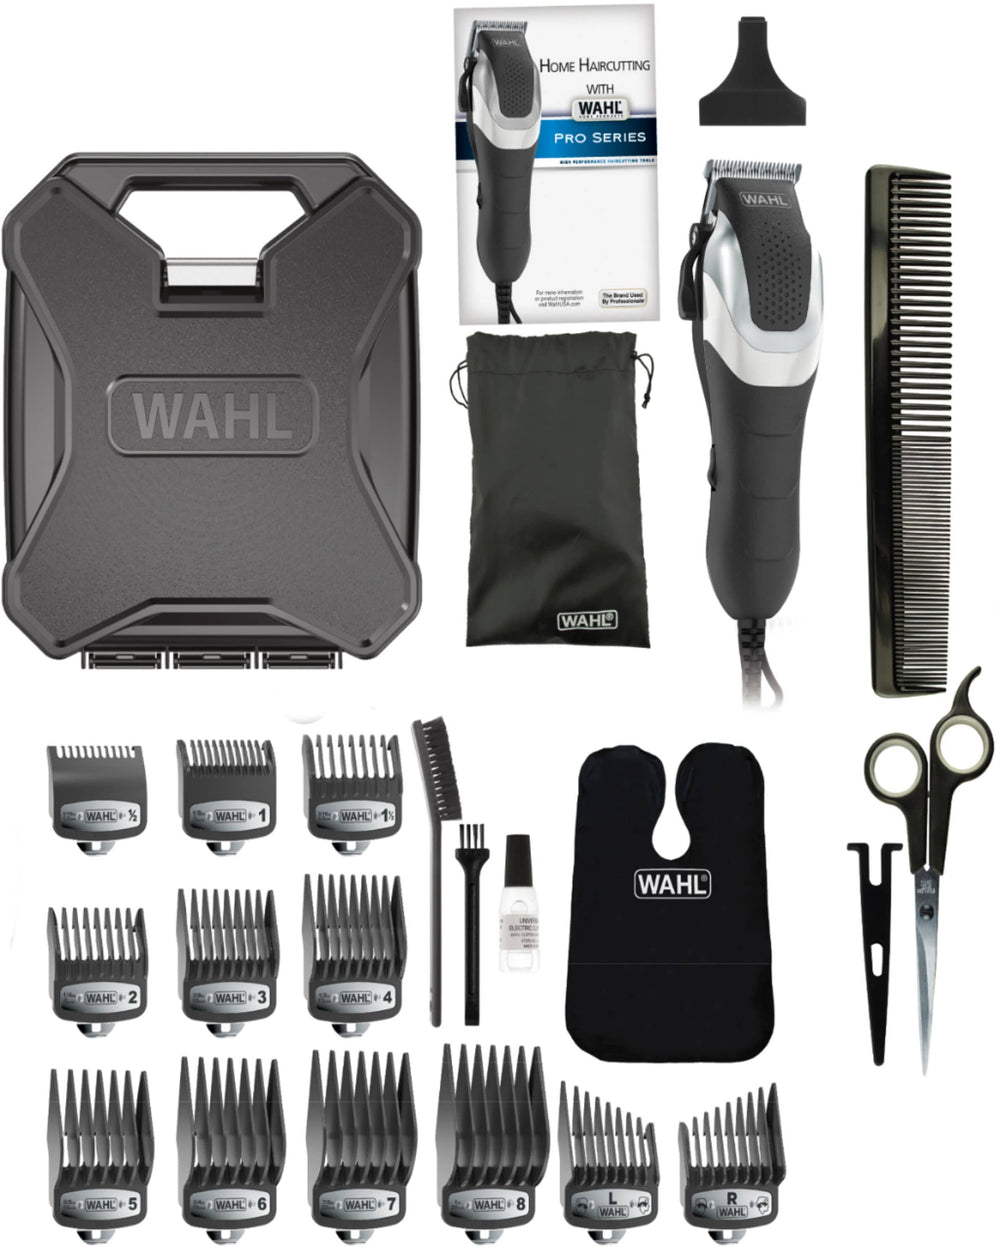 Wahl - Pro Series High Performance Ultra Power Heavy Duty Corded Haircutting Kit for No-Snag Hair Cuts - 79775 - Black_1